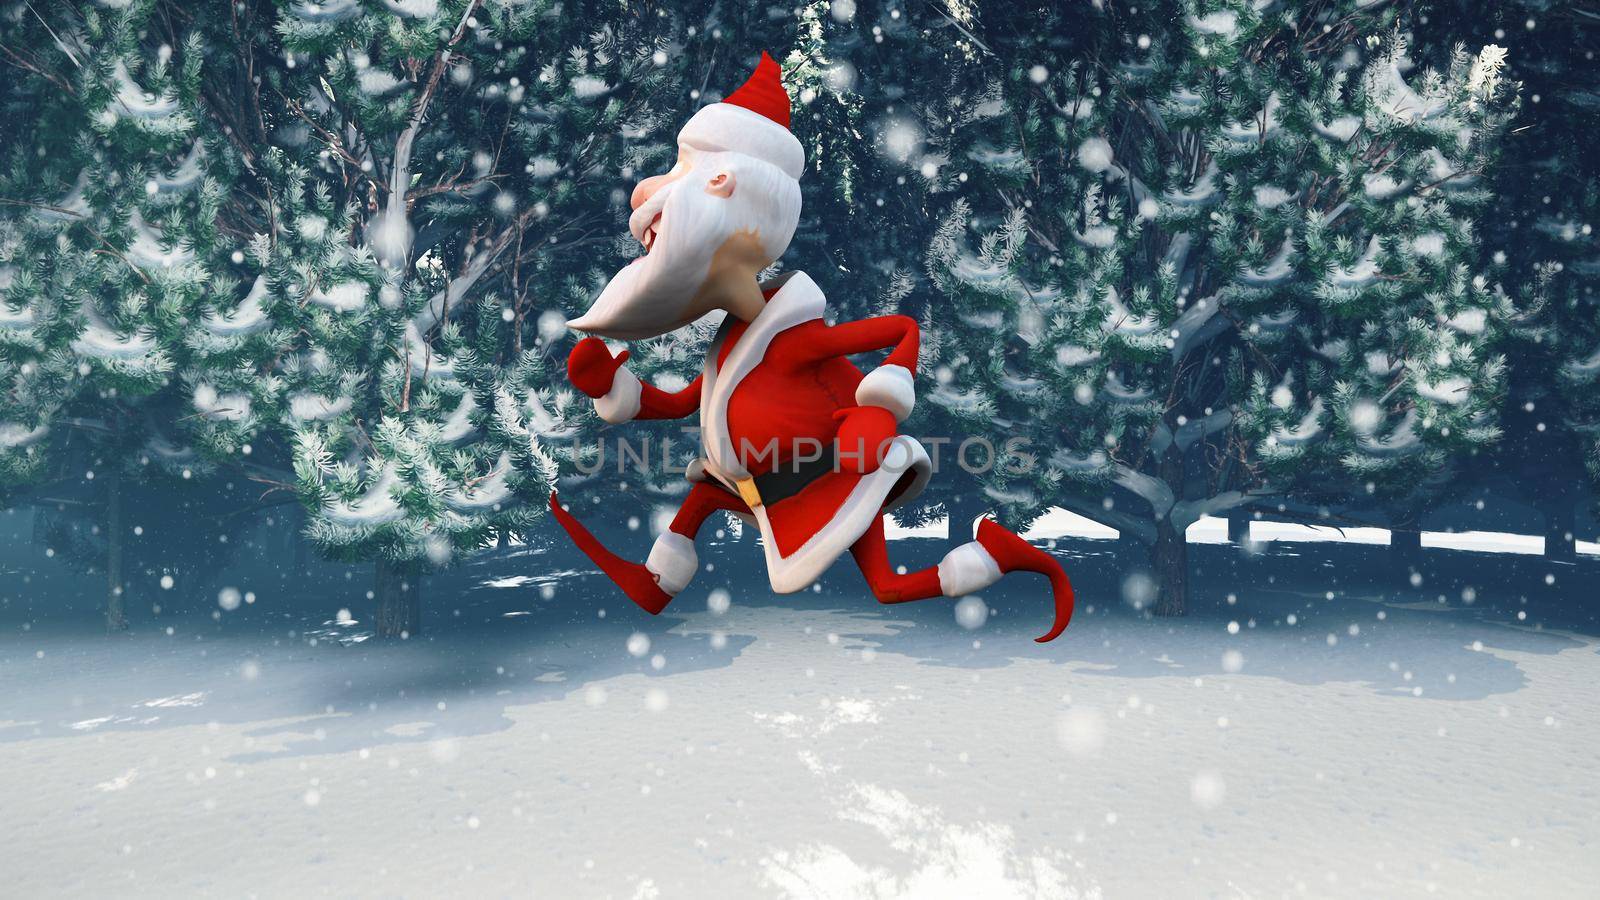 Santa Claus runs through the snow-covered Christmas forest. The Concept of Christmas.